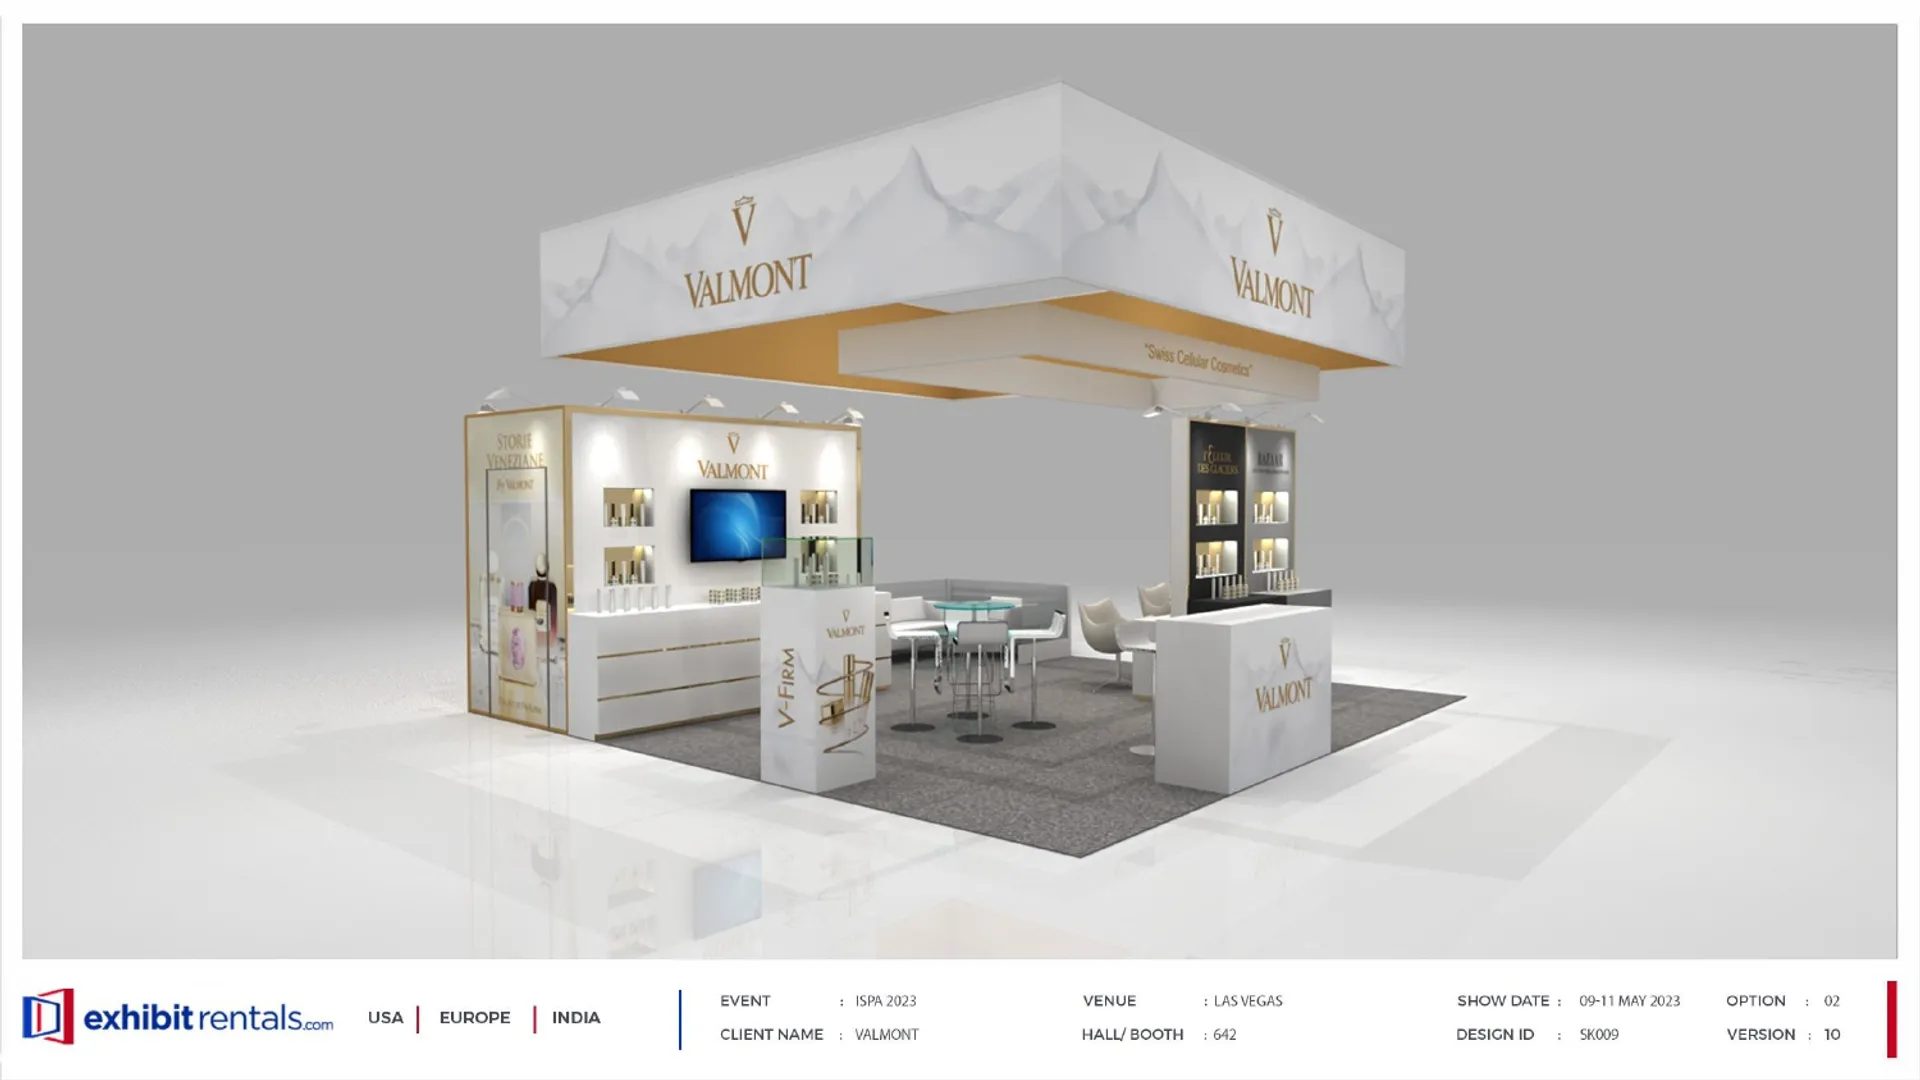 booth-design-projects/Exhibit-Rentals/2024-04-17-20x20-ISLAND-Project-109/2.10_Valmont_ISPA 2023_ER design presentation -19_page-0001-l2ide.jpg